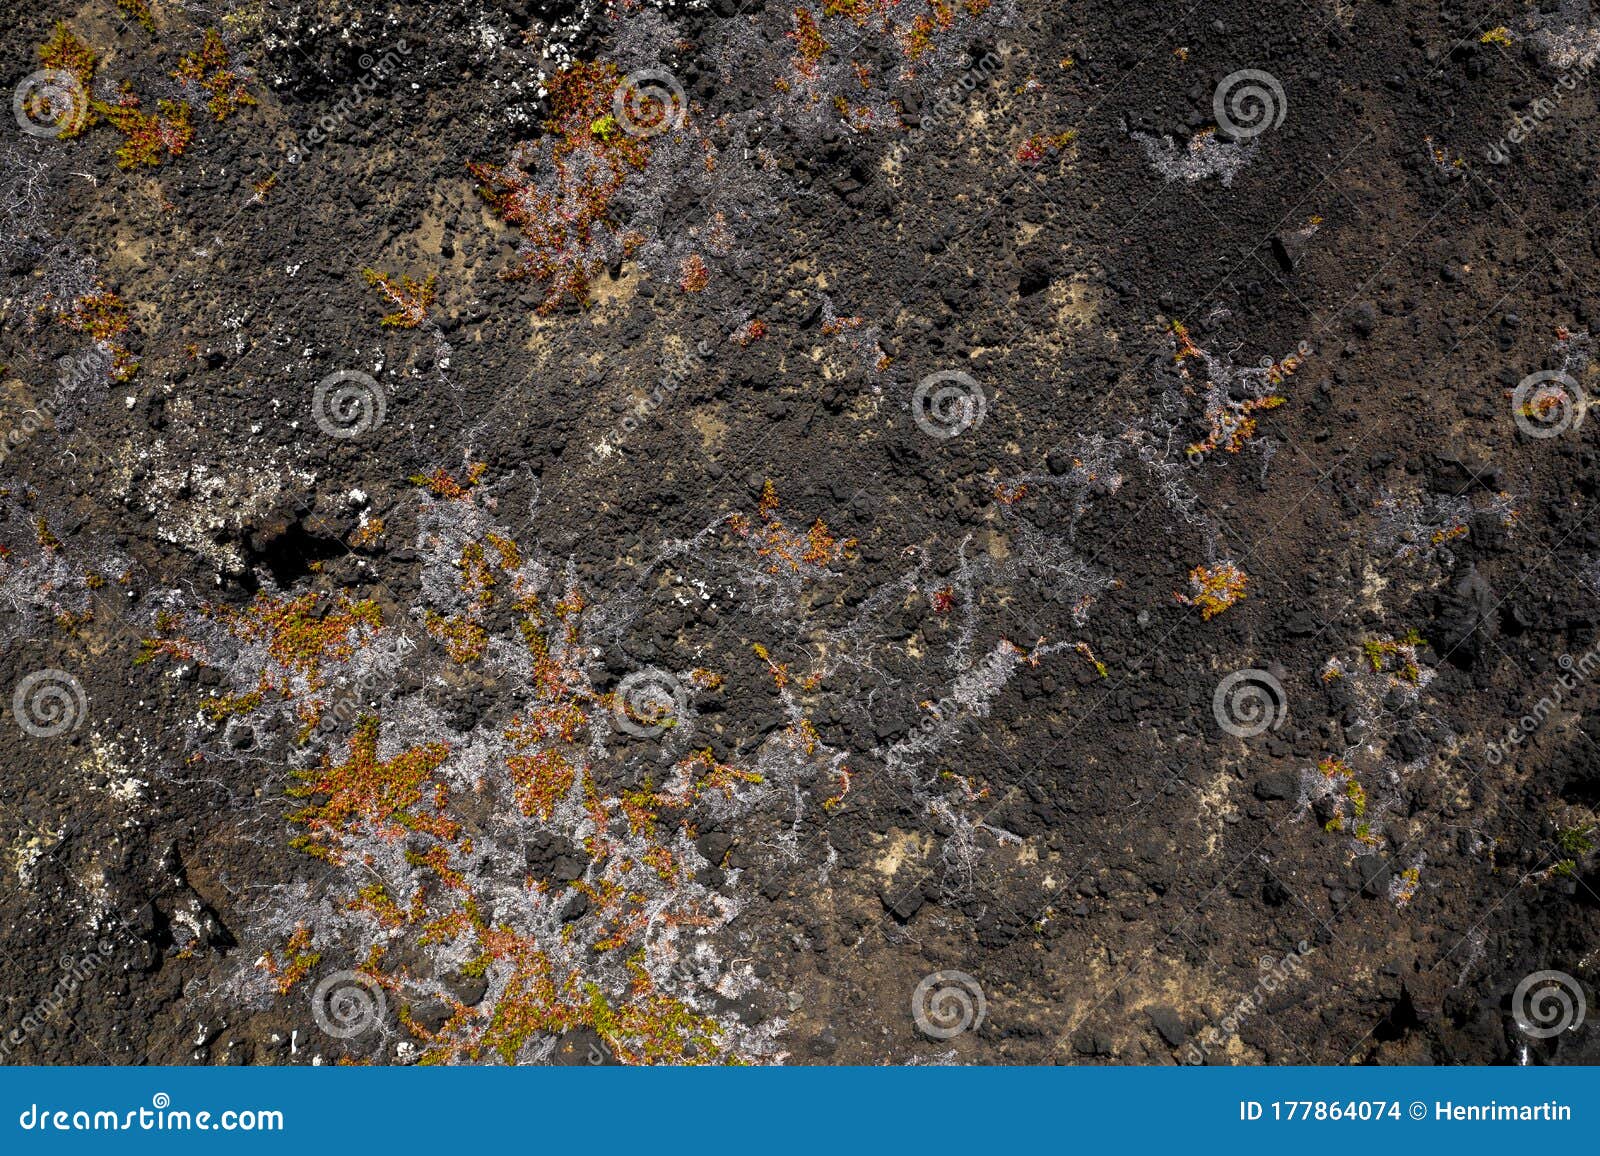 aerial image showing colorful orange vegetation on a black lava beach at the westcoast of faial island, azores